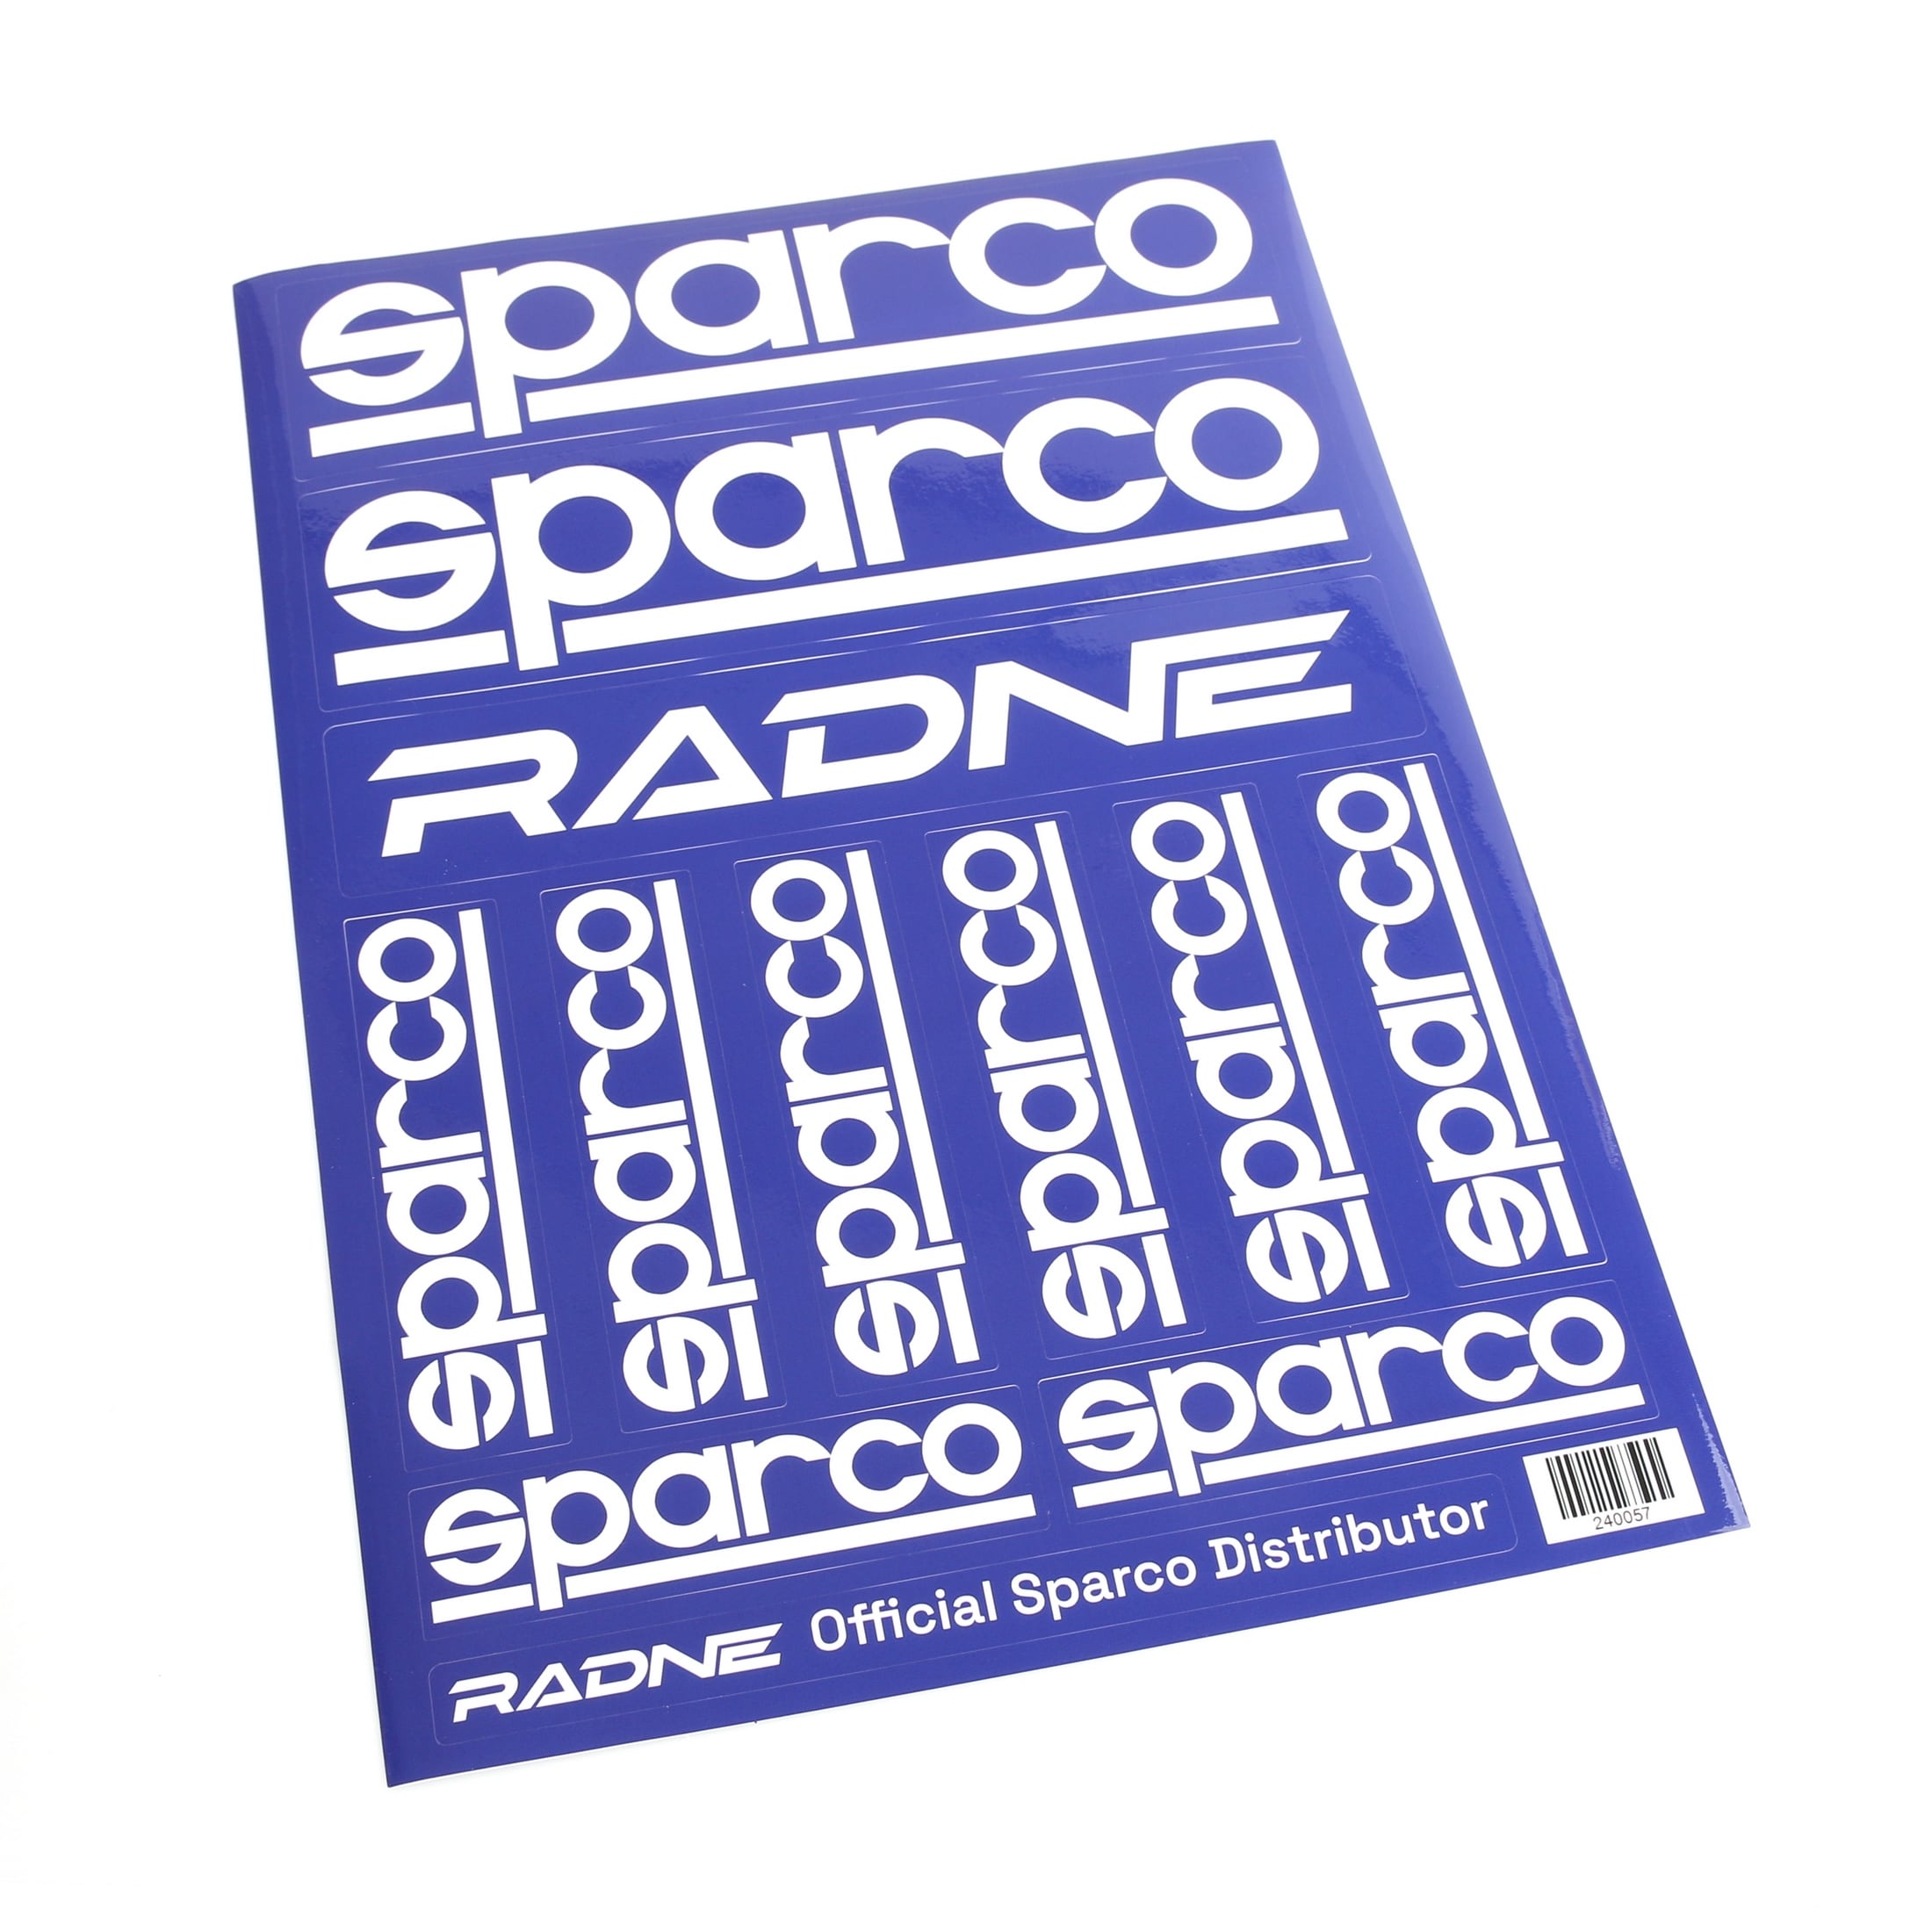 Kit of Sparco Official Stickers